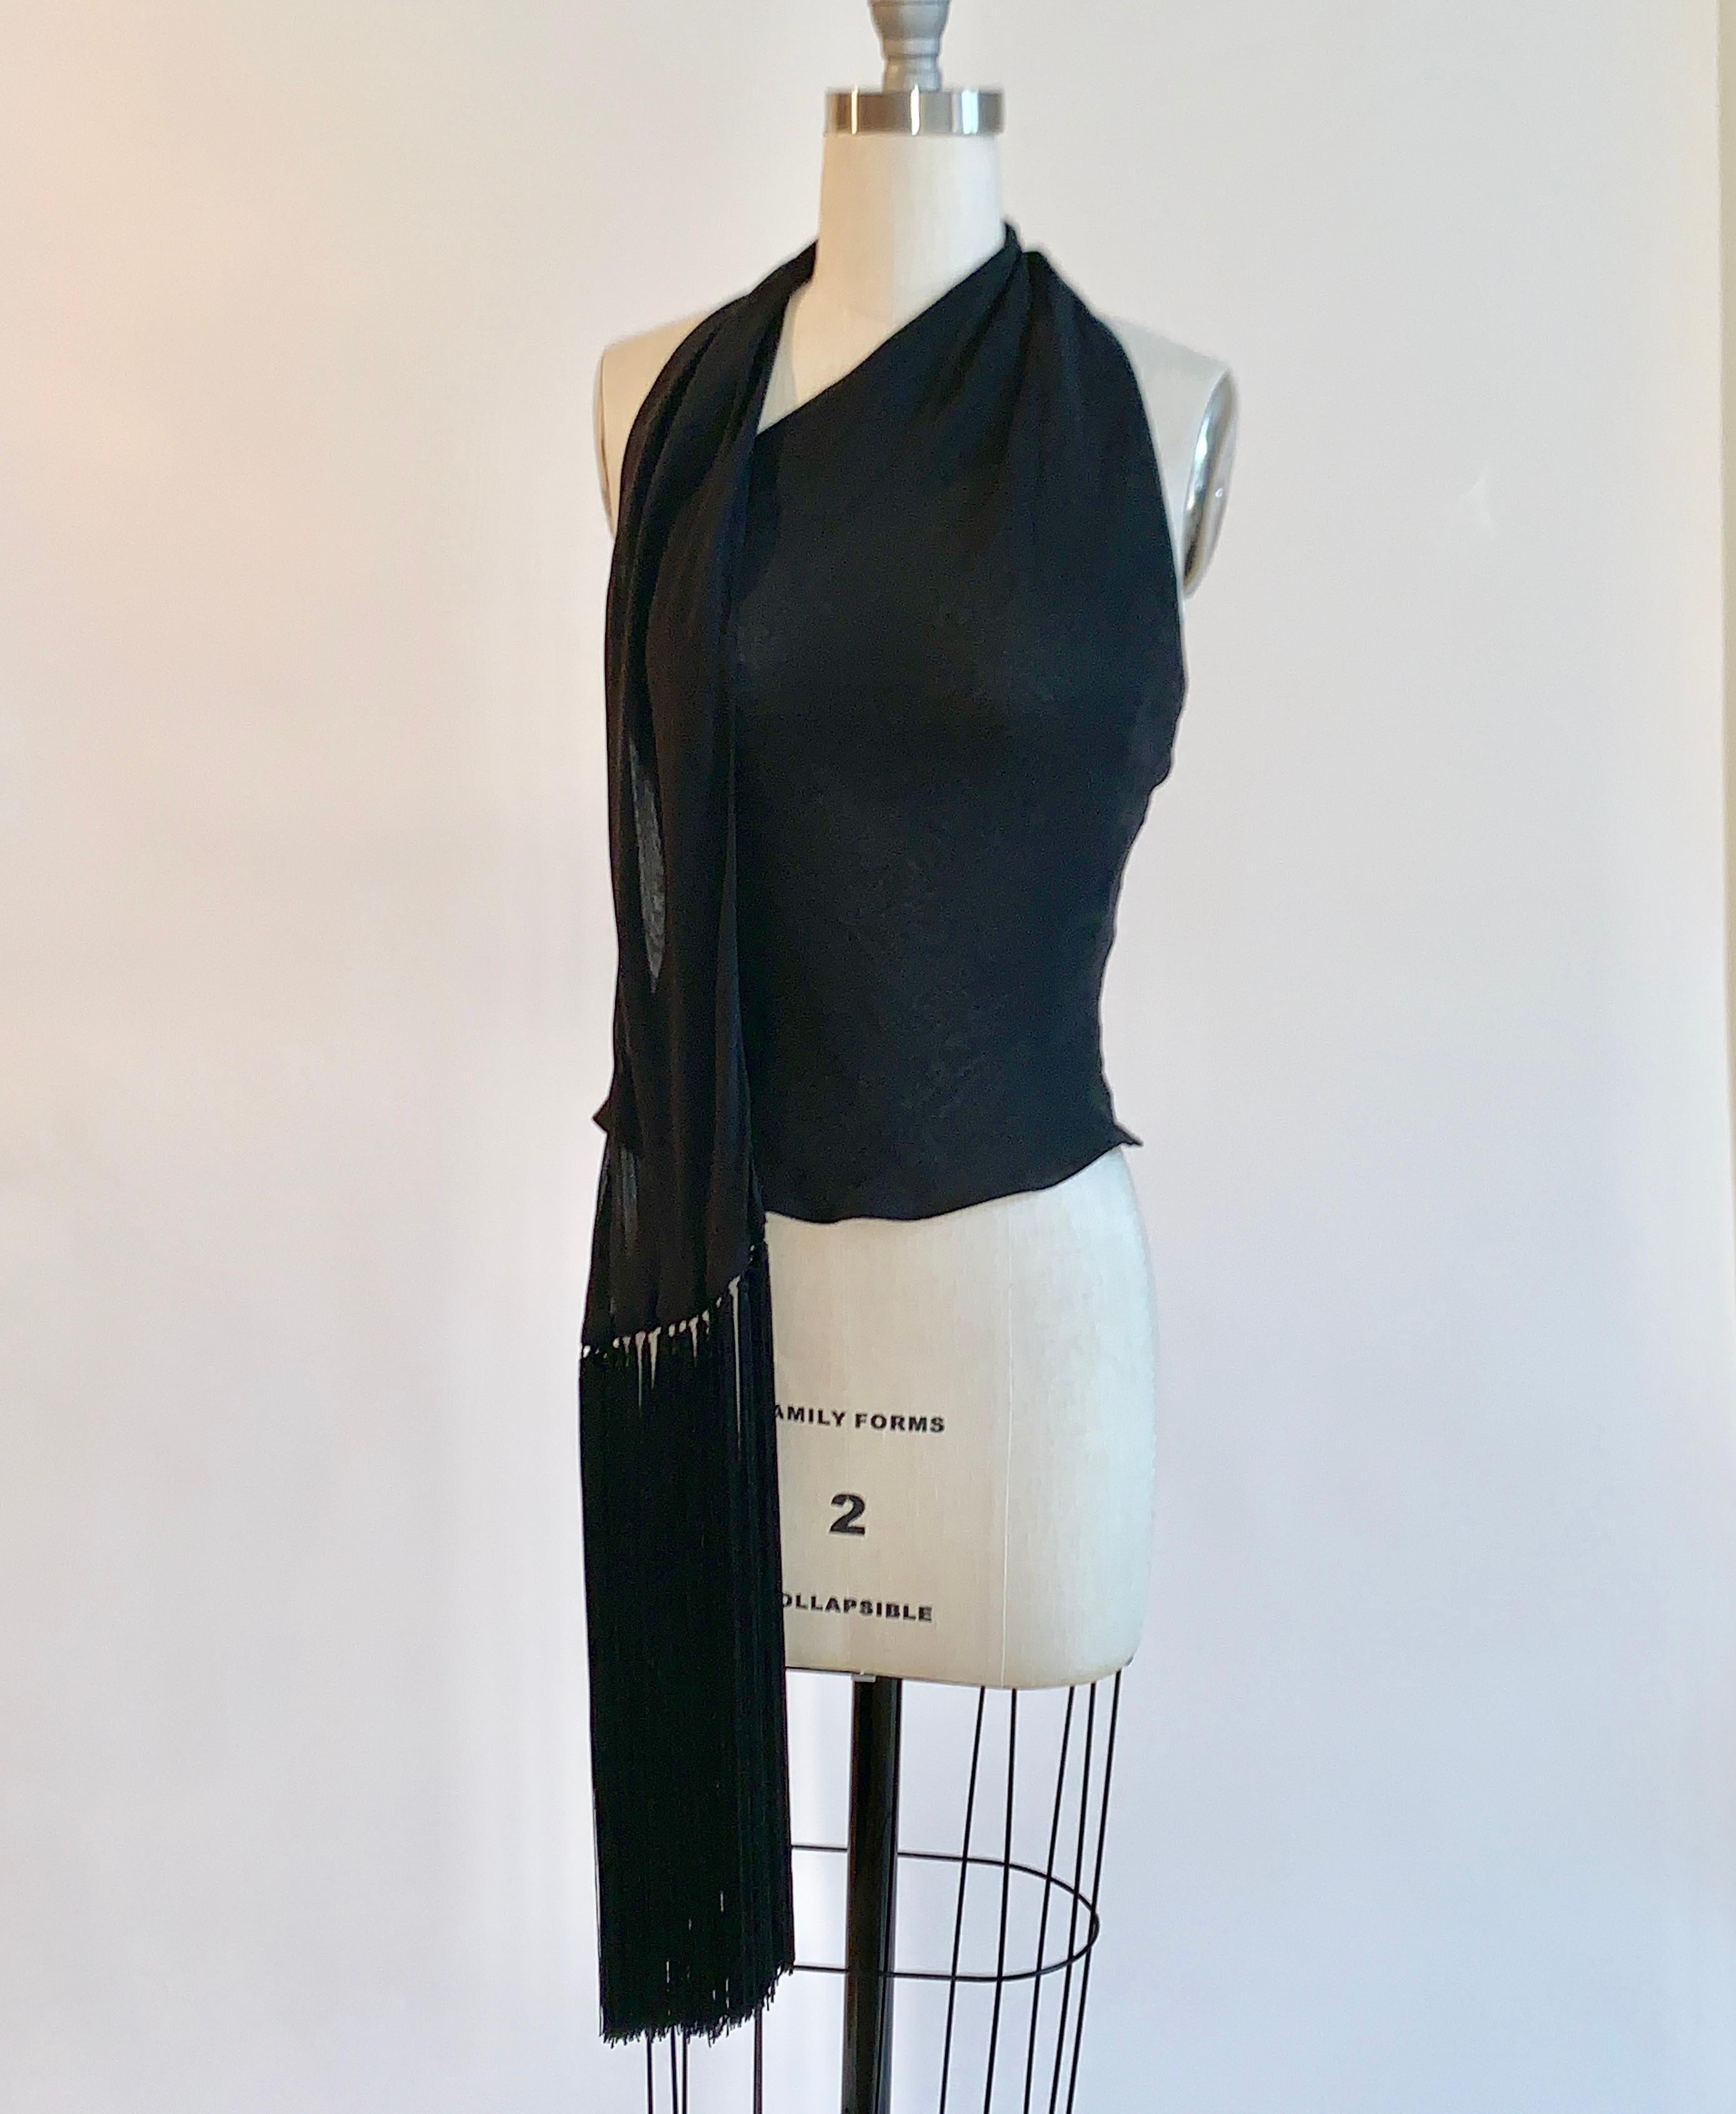 Vintage Givenchy Couture late 1990s black halter top with beautiful long fringe trim on strap that drapes over one side of shoulder and wraps around neck (or could hang straight down back, if desired.) Two layers of sheer fabric create a semi-sheer